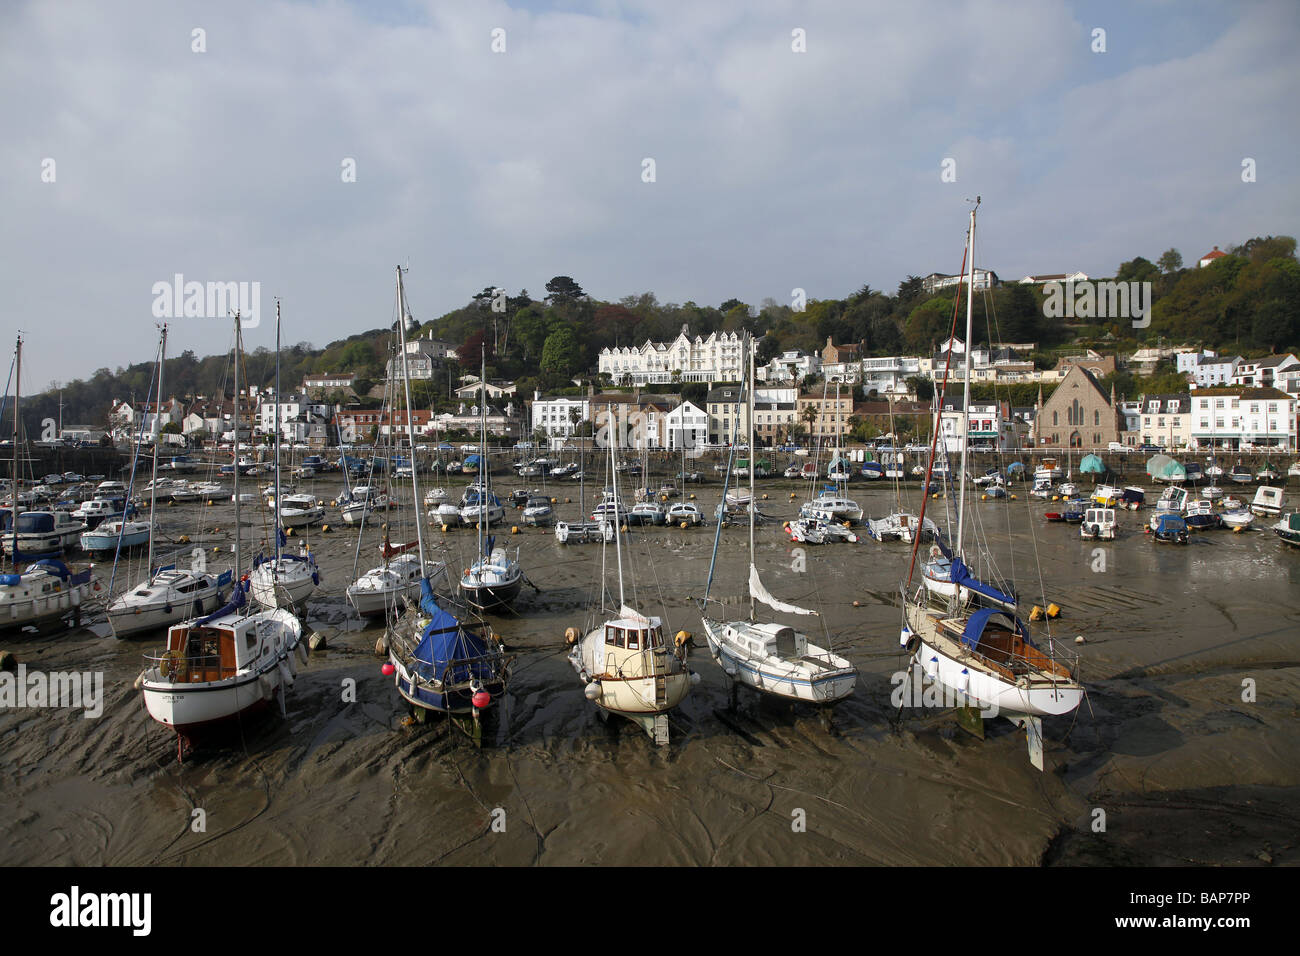 BOATS AND YACHTS IN HARBOUR JERSEY CHANNEL ISLANDS UK ST. AUBIN JERSEY CHANNEL IS 21 April 2009 Stock Photo